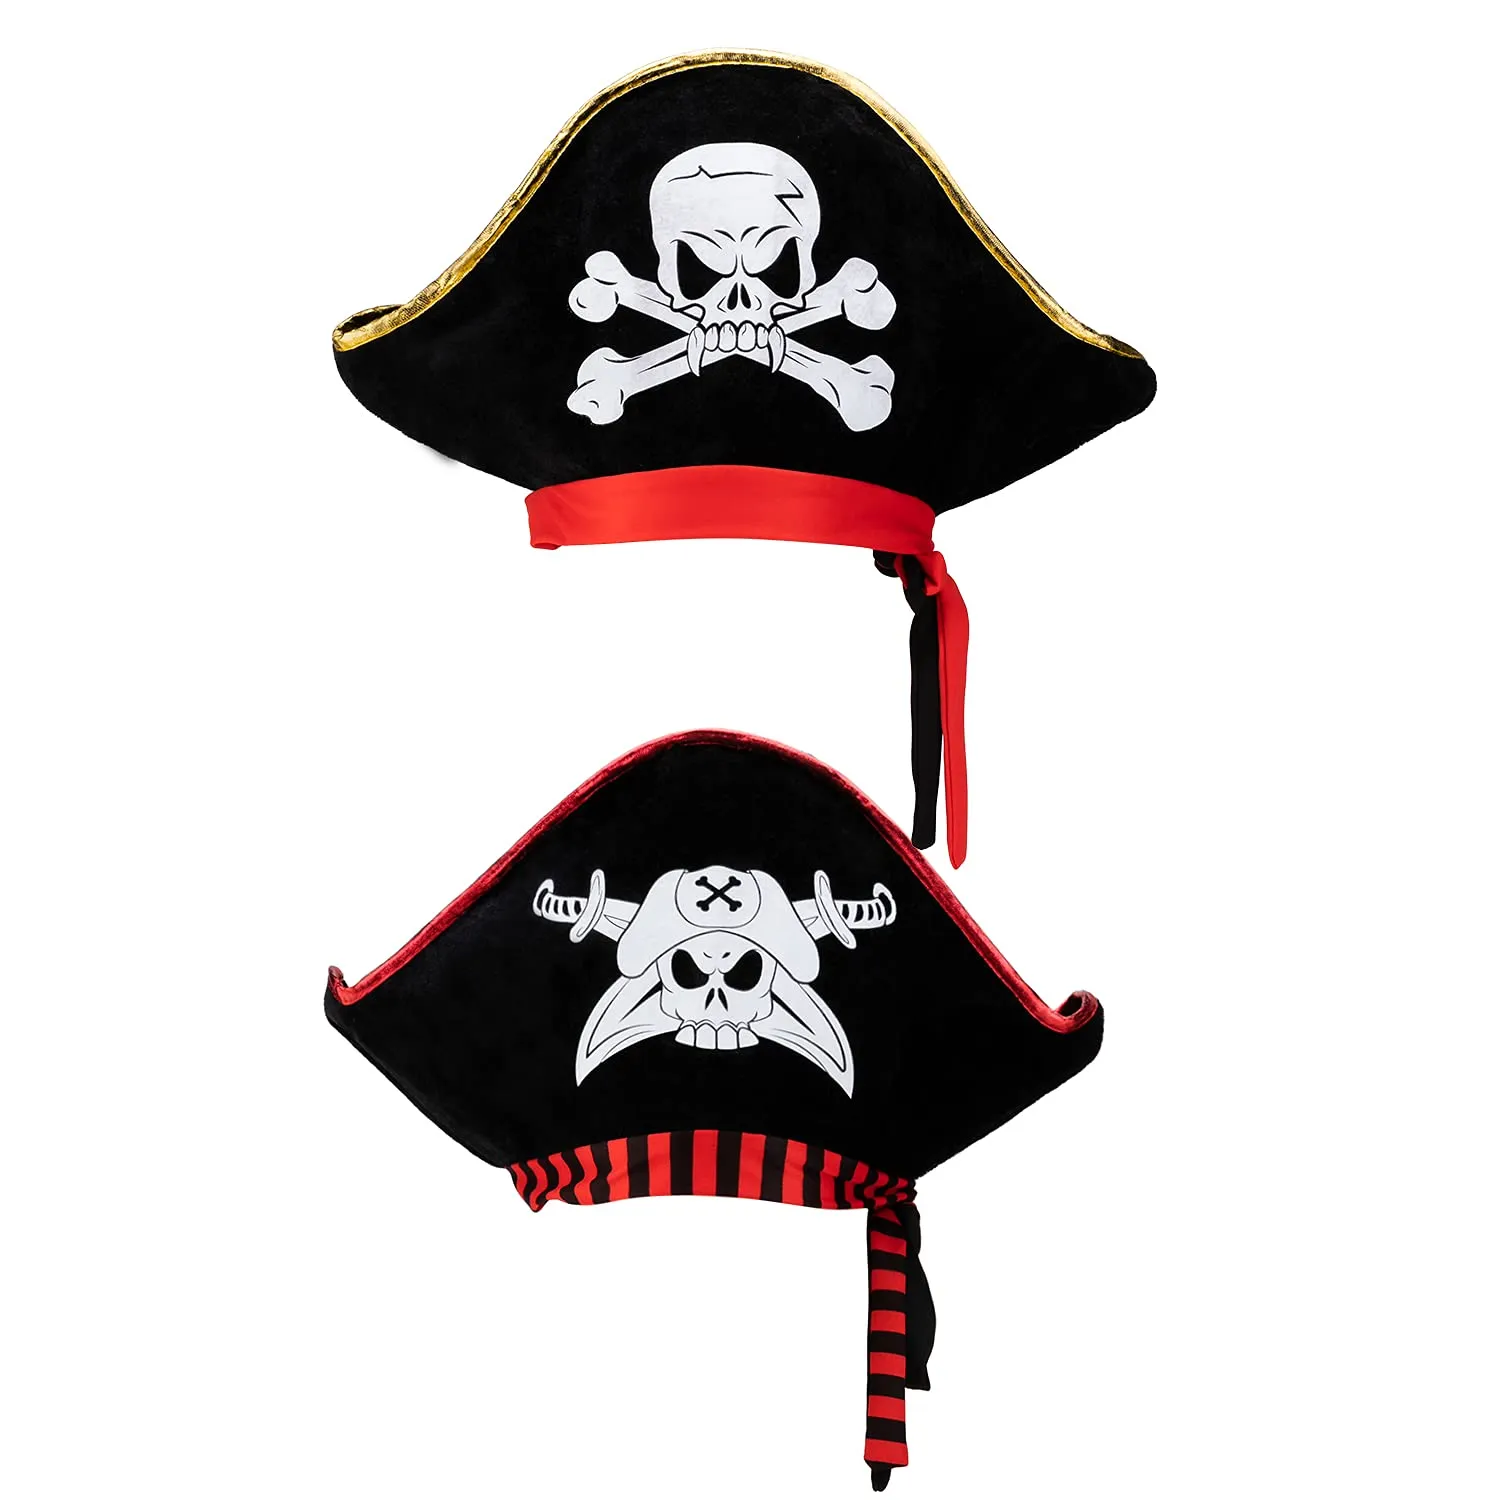 D-Fokes 2 Pieces Pirate Hat Skull Print Pirate Captain Costume Cap - Pirate  Accessories Funny Party Hat